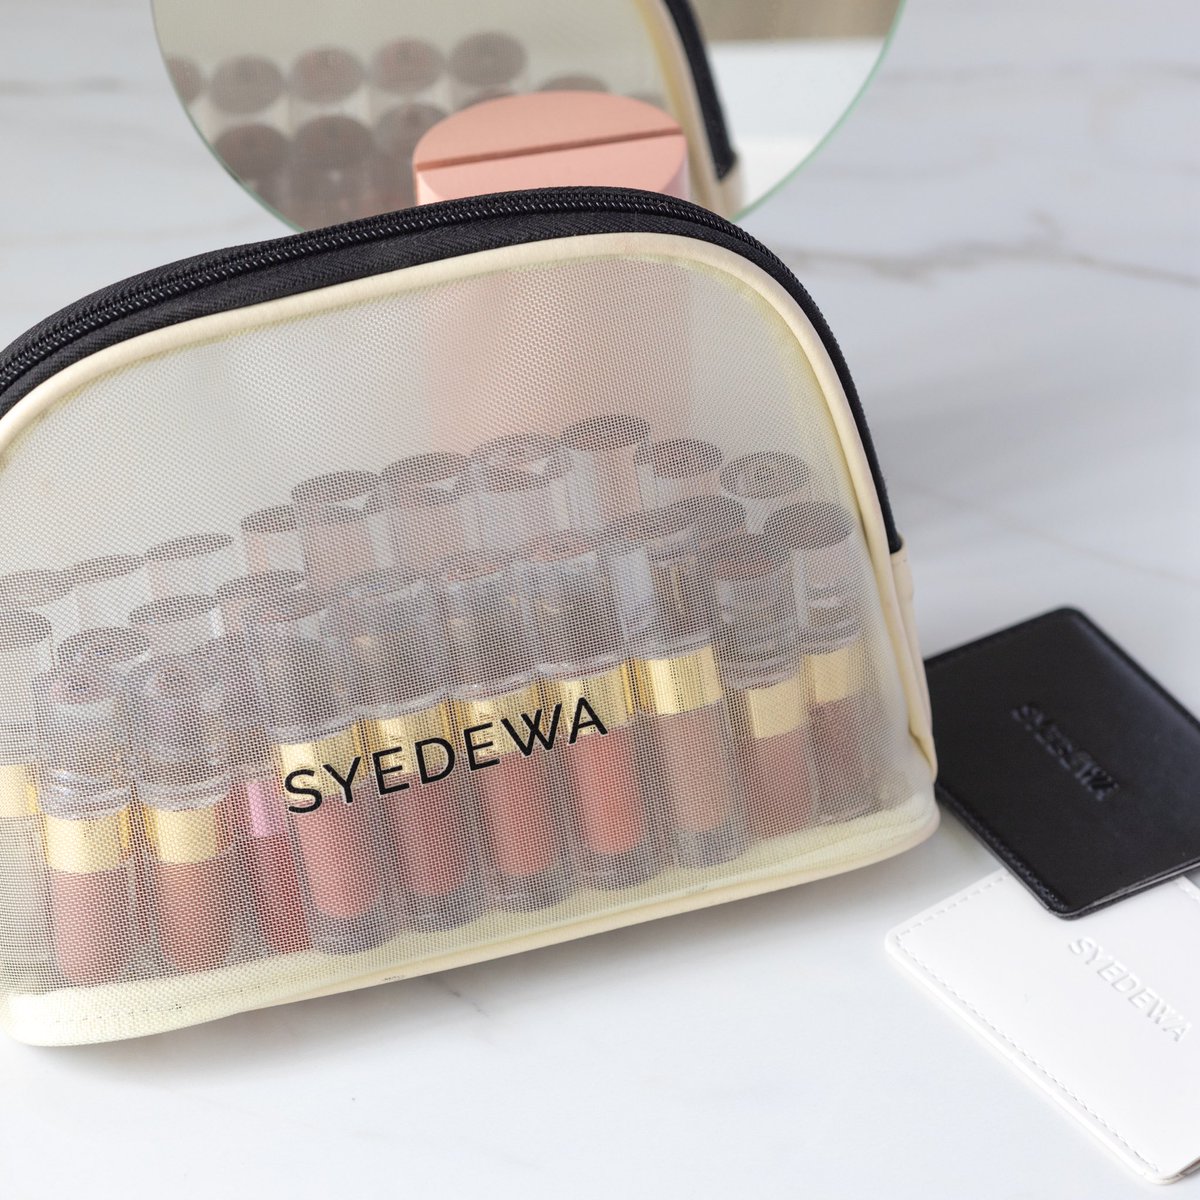 Can you guess how many Syedewa Minis can fit into the Nude Pouch?

This Syedewa Nude Pouch is made of nylon mesh, which is practical and breathable.

Perfect for organizing makeup or accessories to keep them handy.

#syedewacosmetics #makeuppouch #syedewaminis